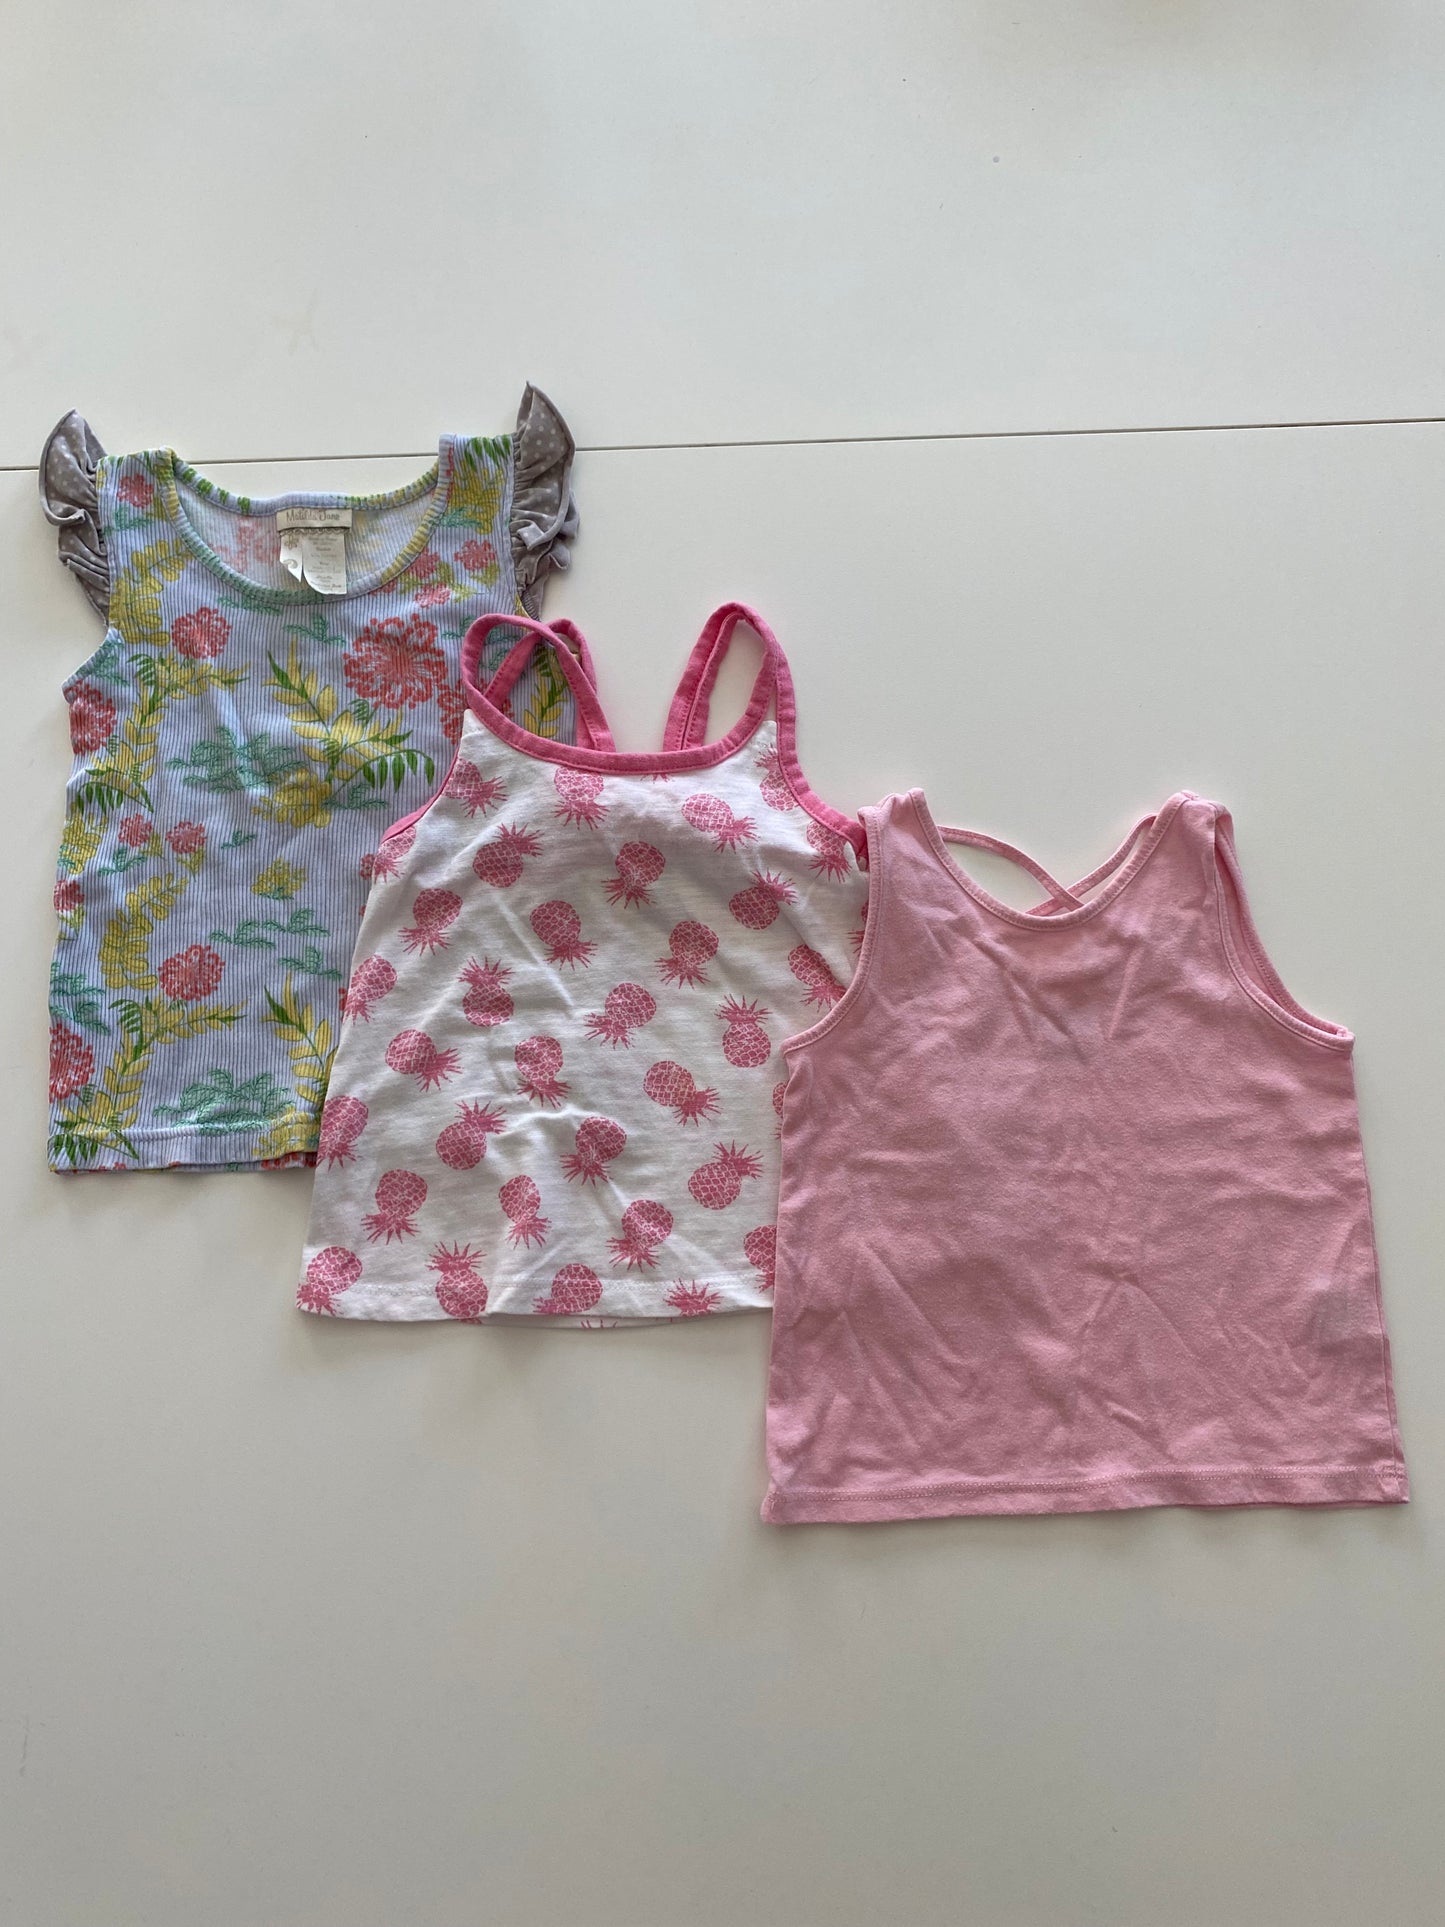 Matilda Jane blue floral tank and Children’s Place pink tank and Old Navy white with pink pineapple tank bundle